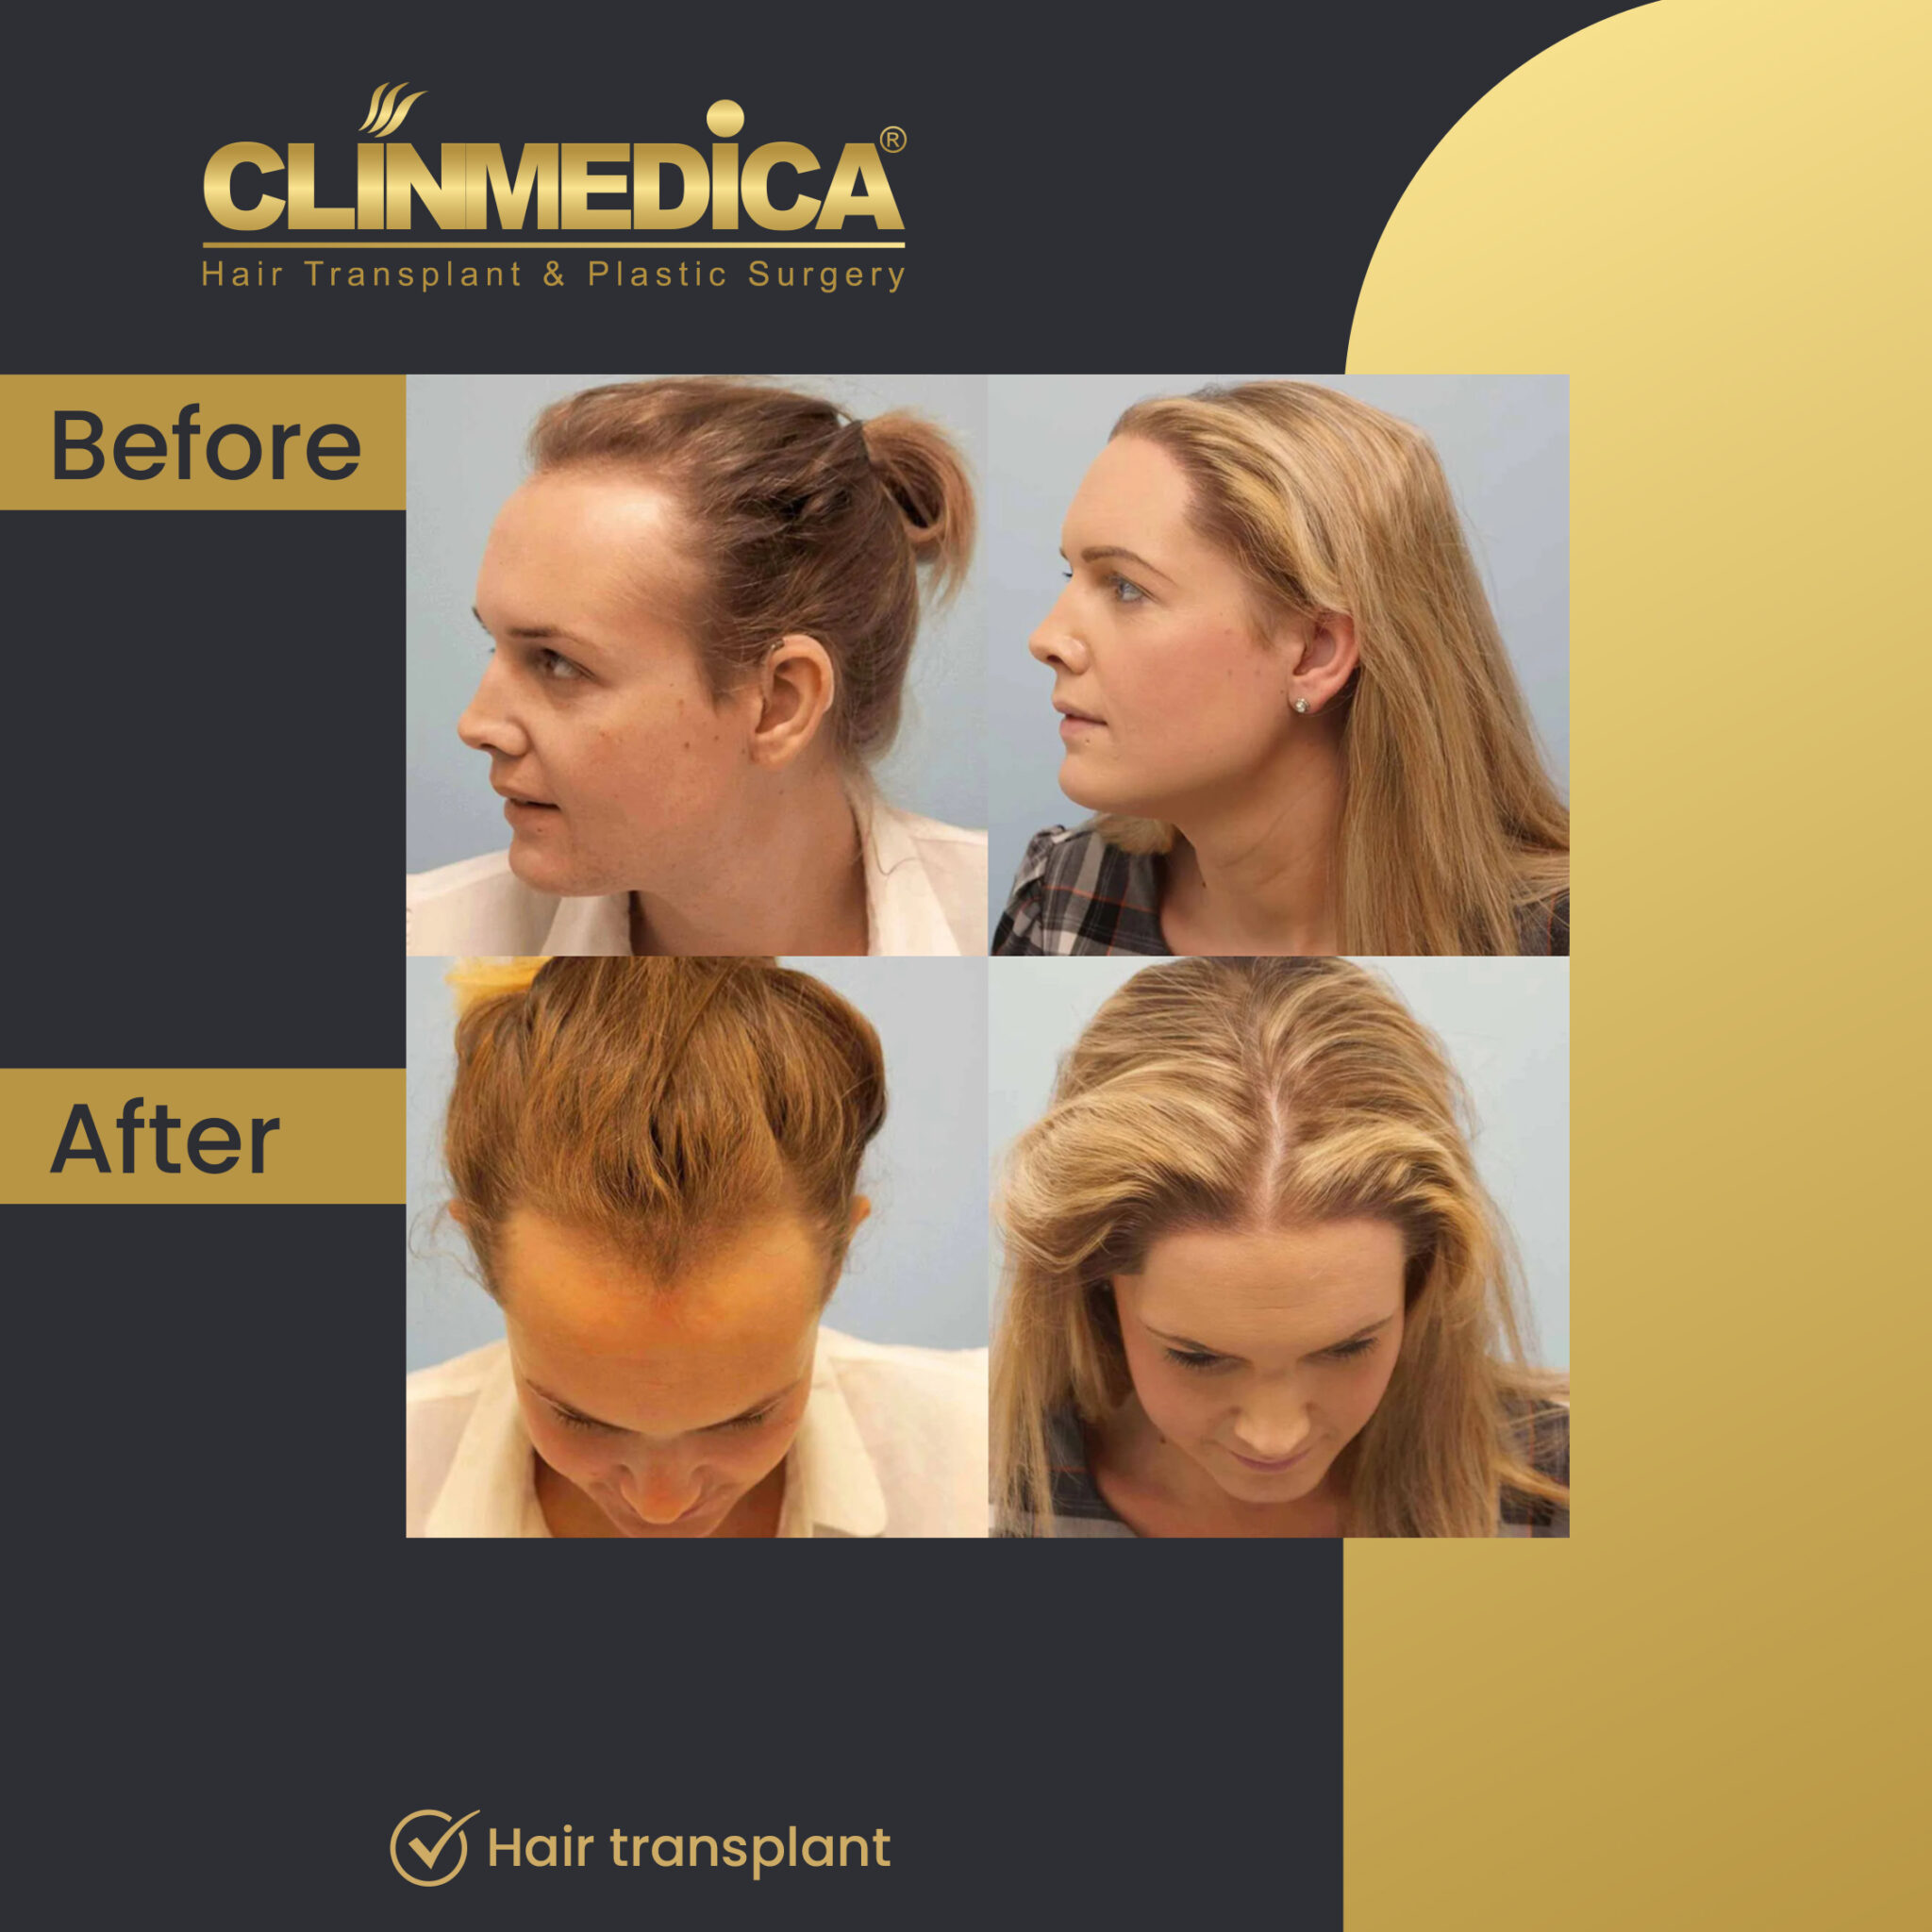 Hair-Transplant-for-women-Before-&-After-clinmedica-23.jpg-